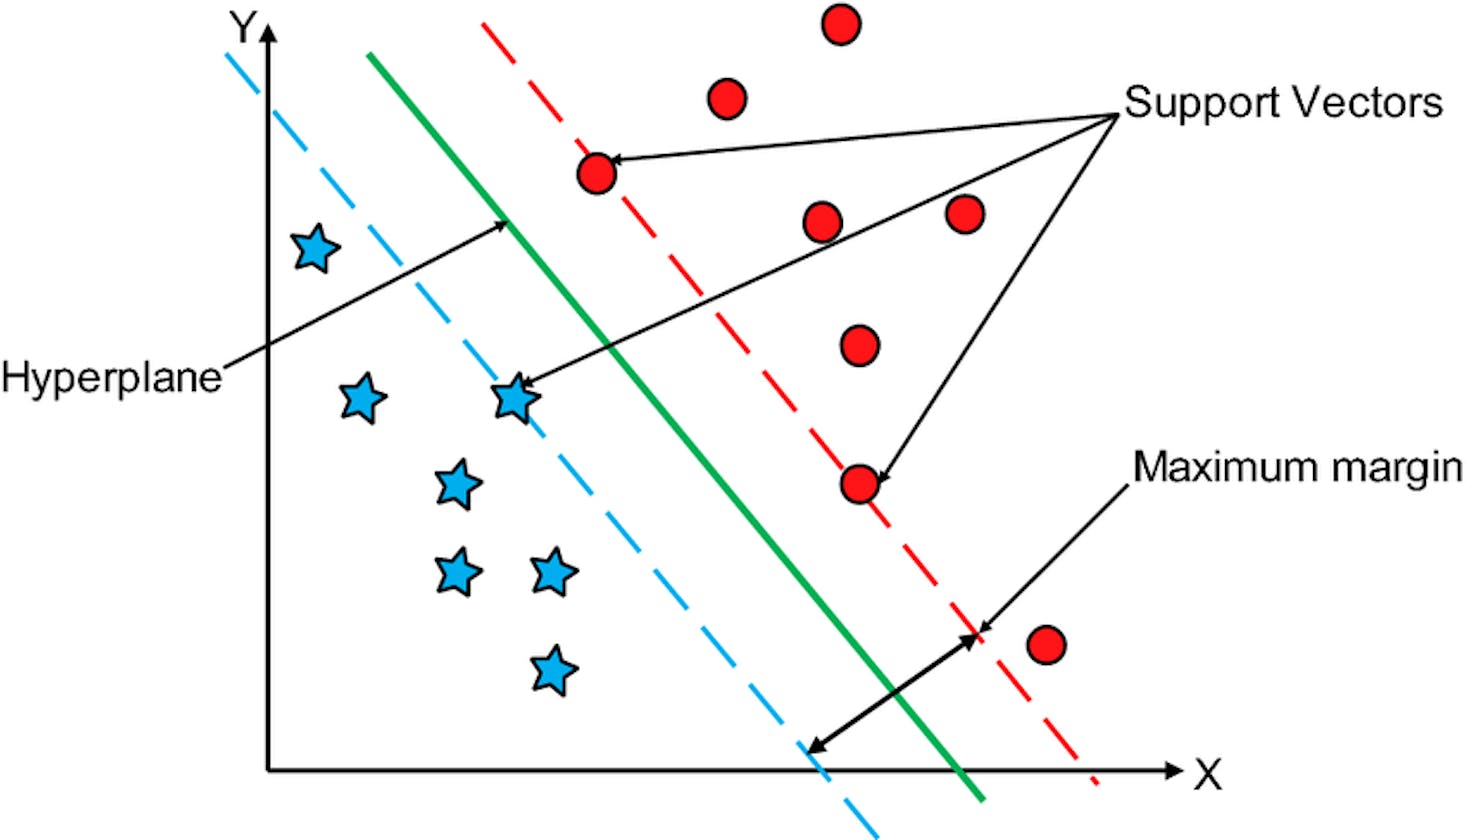 Support Vector Machine (SVM) Simply Explained